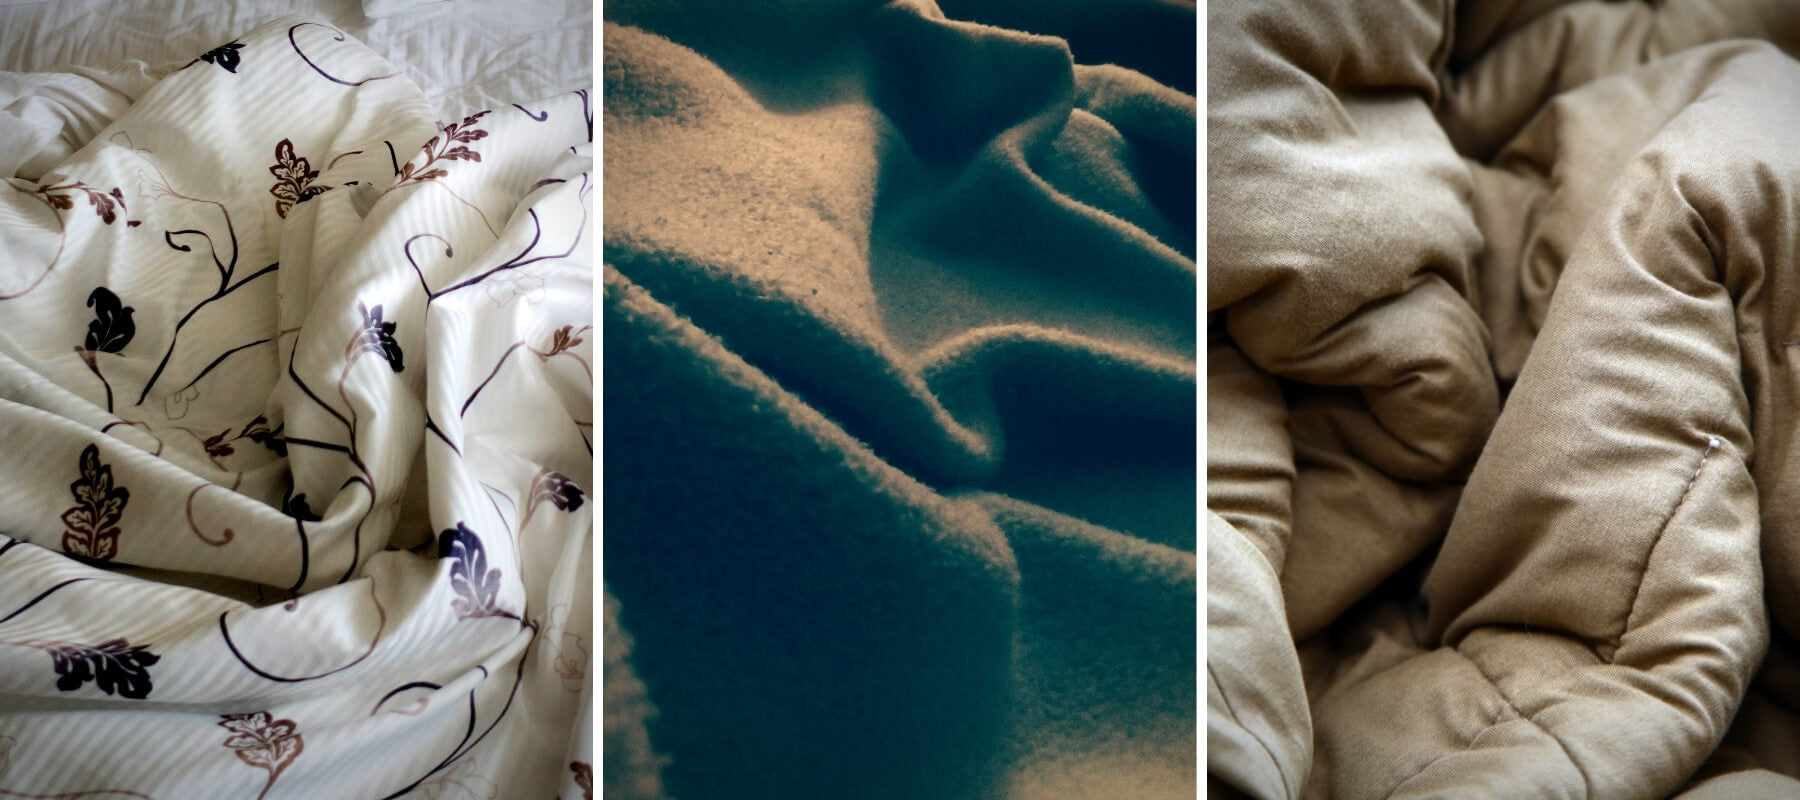 The choice between a comforter, blanket or a duvet for a bed